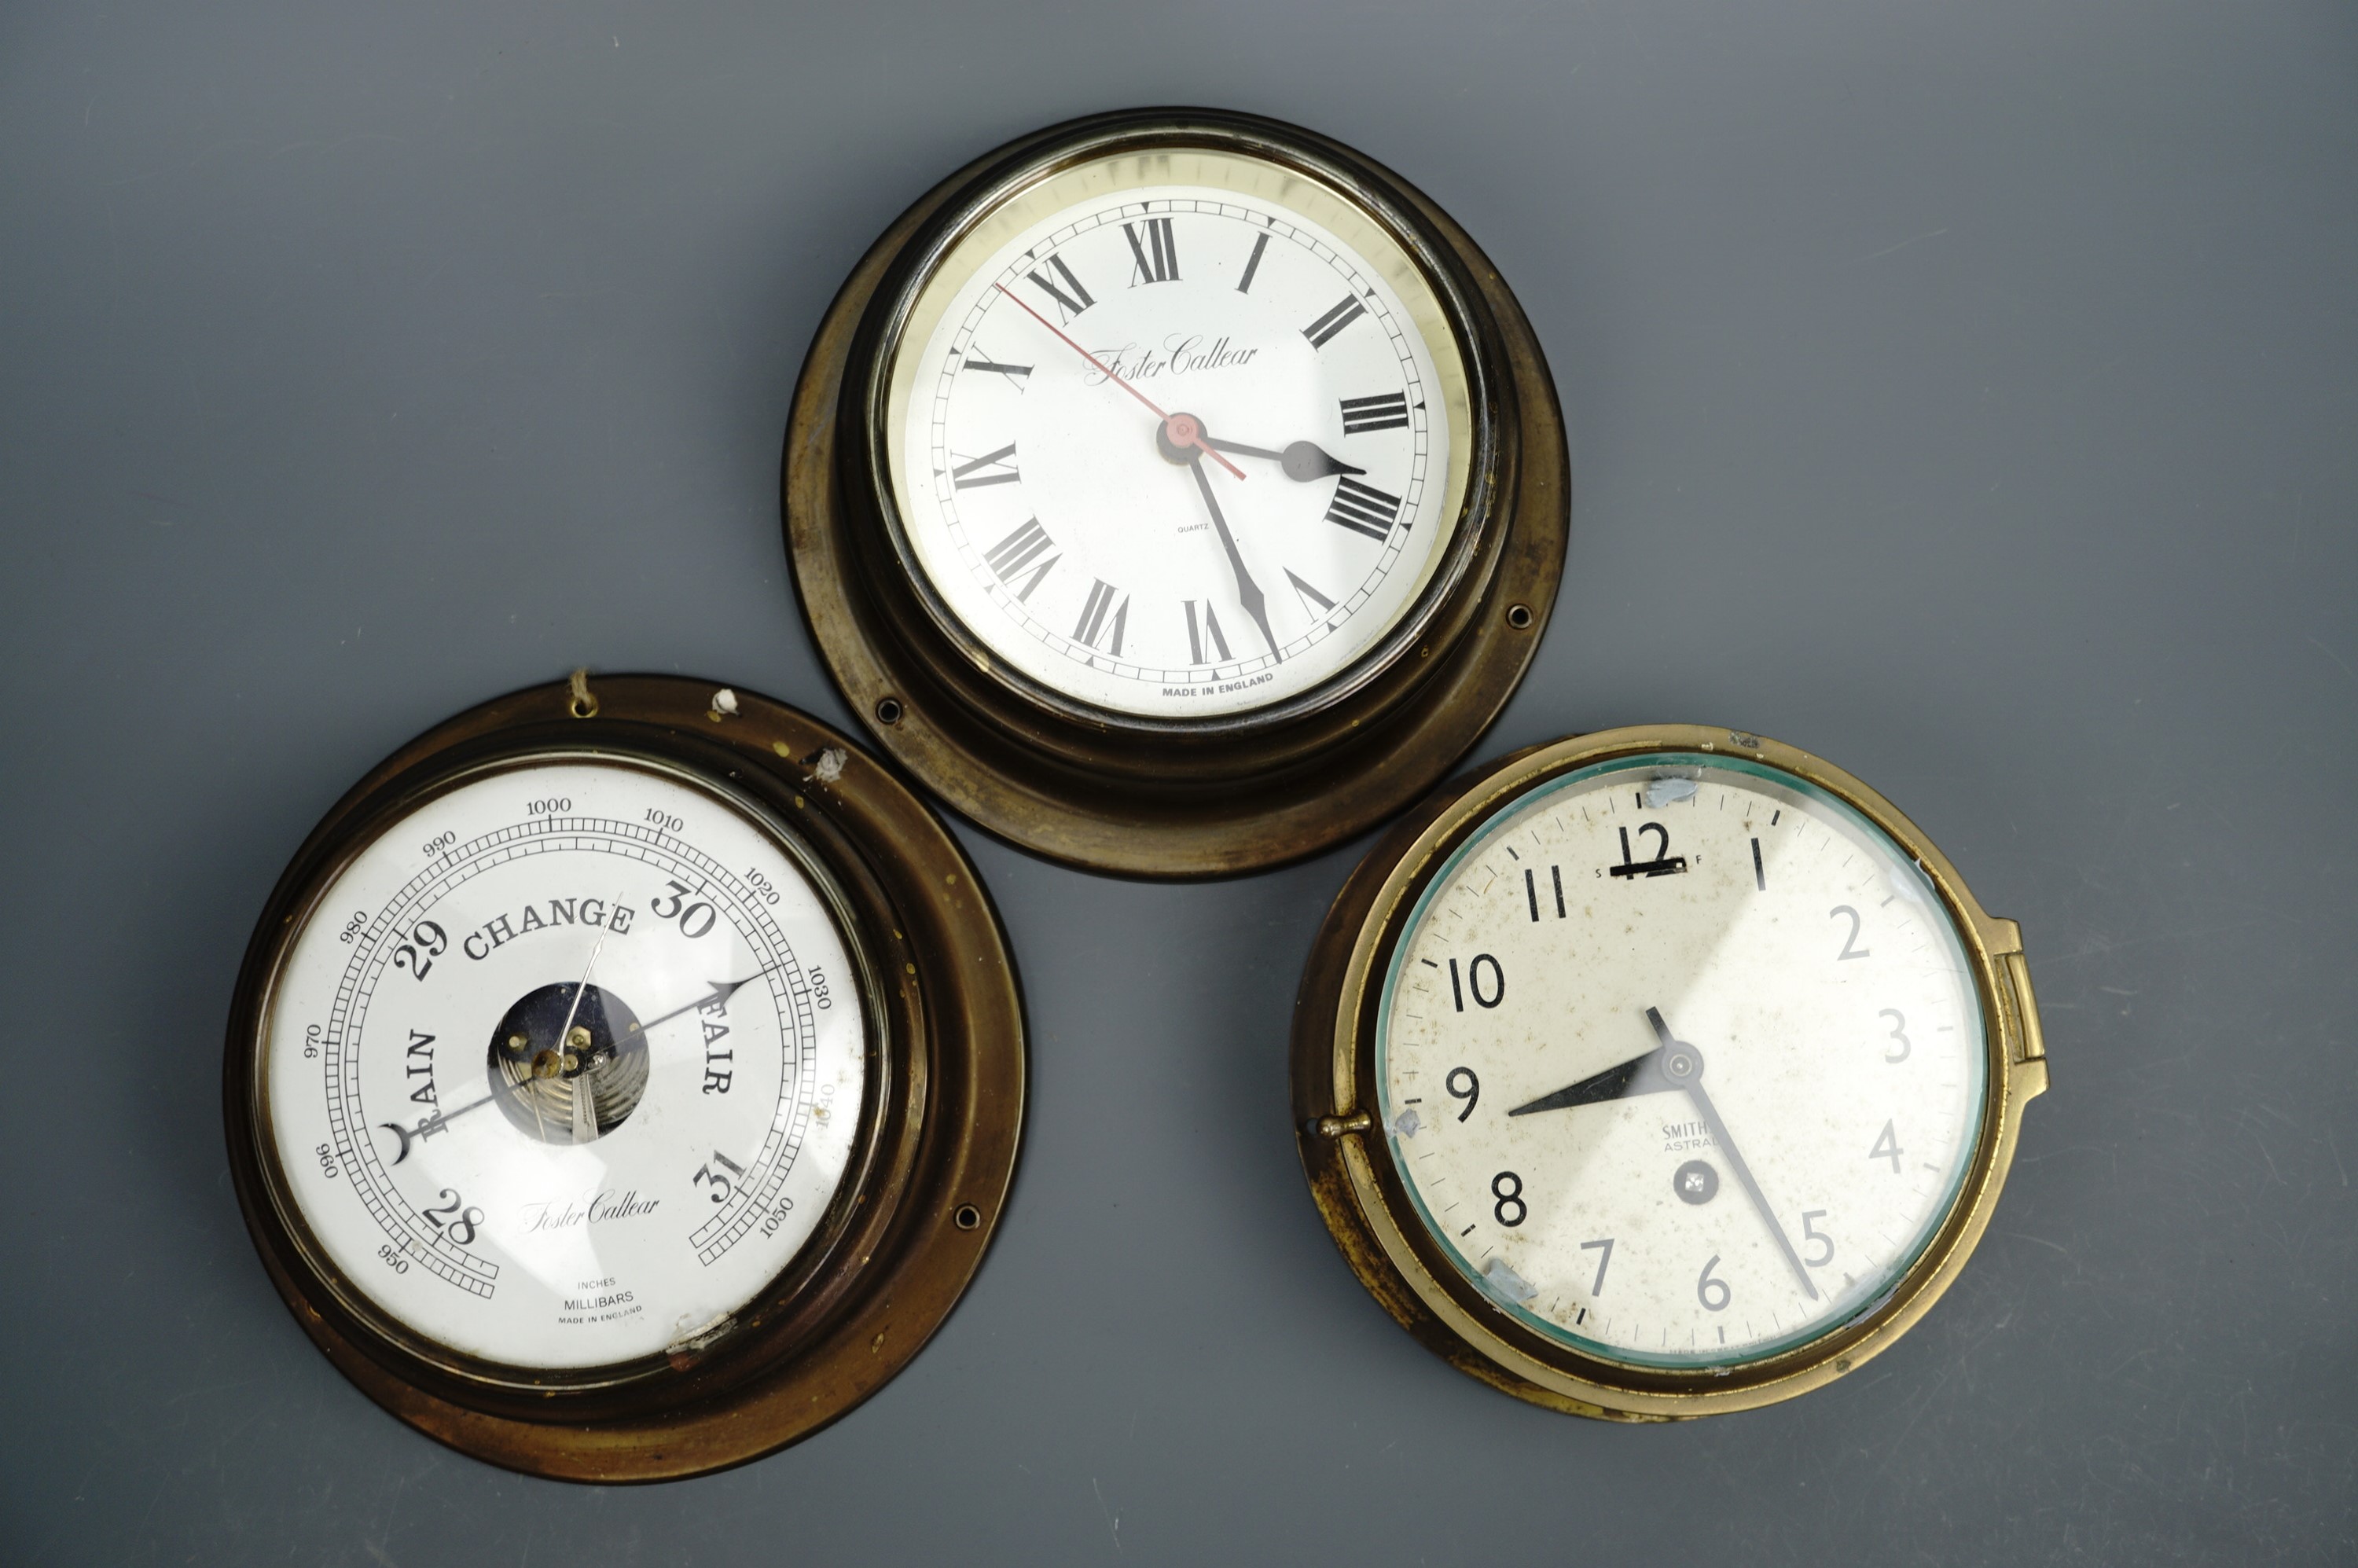 A Smith's Astral marine bulkhead clock, second quarter 20th Century, together with a Foste Callear